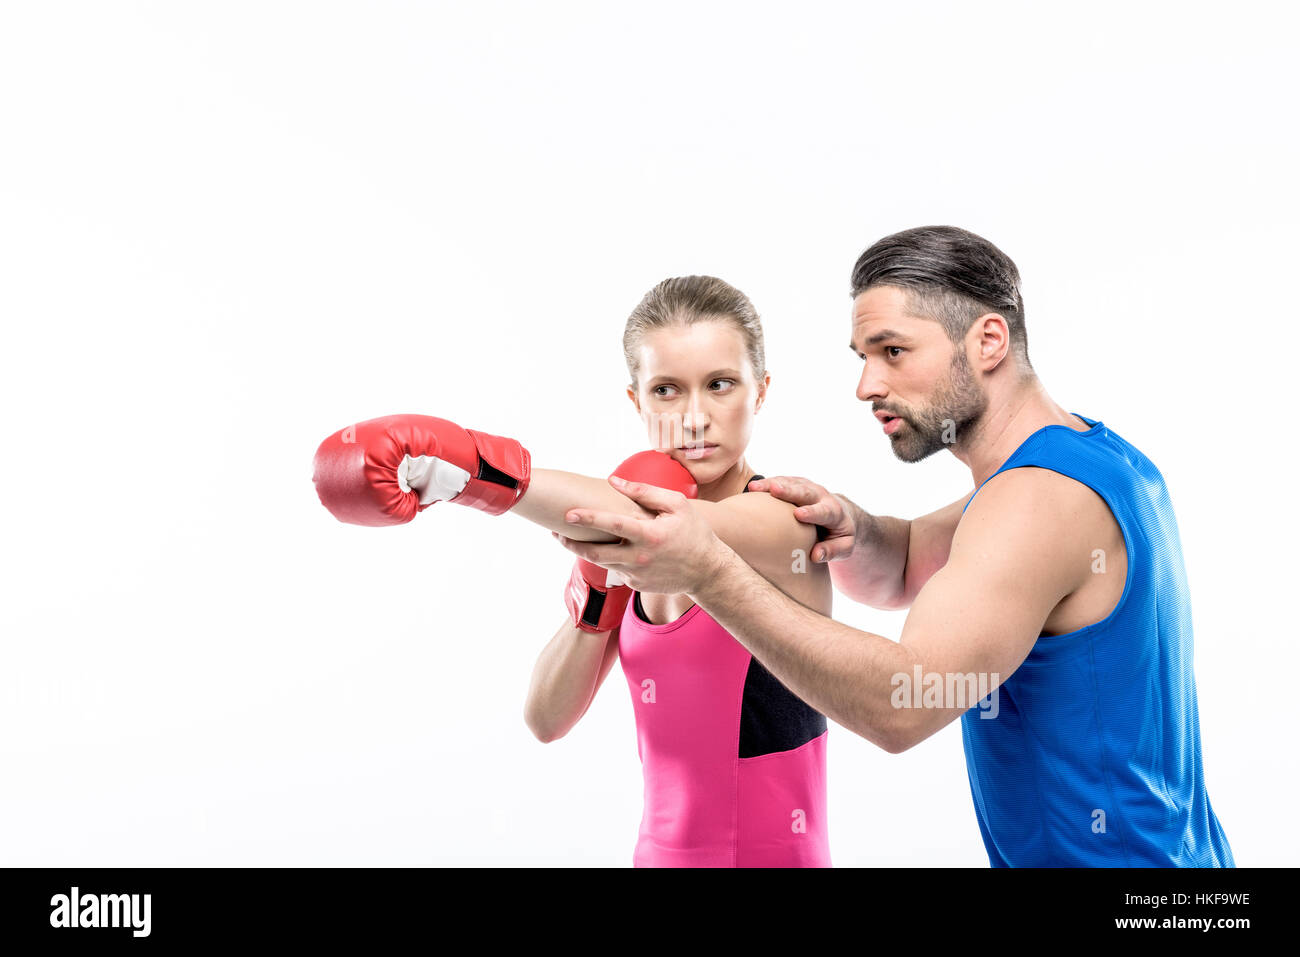 Girl practicing boxing with trainer Stock Photo